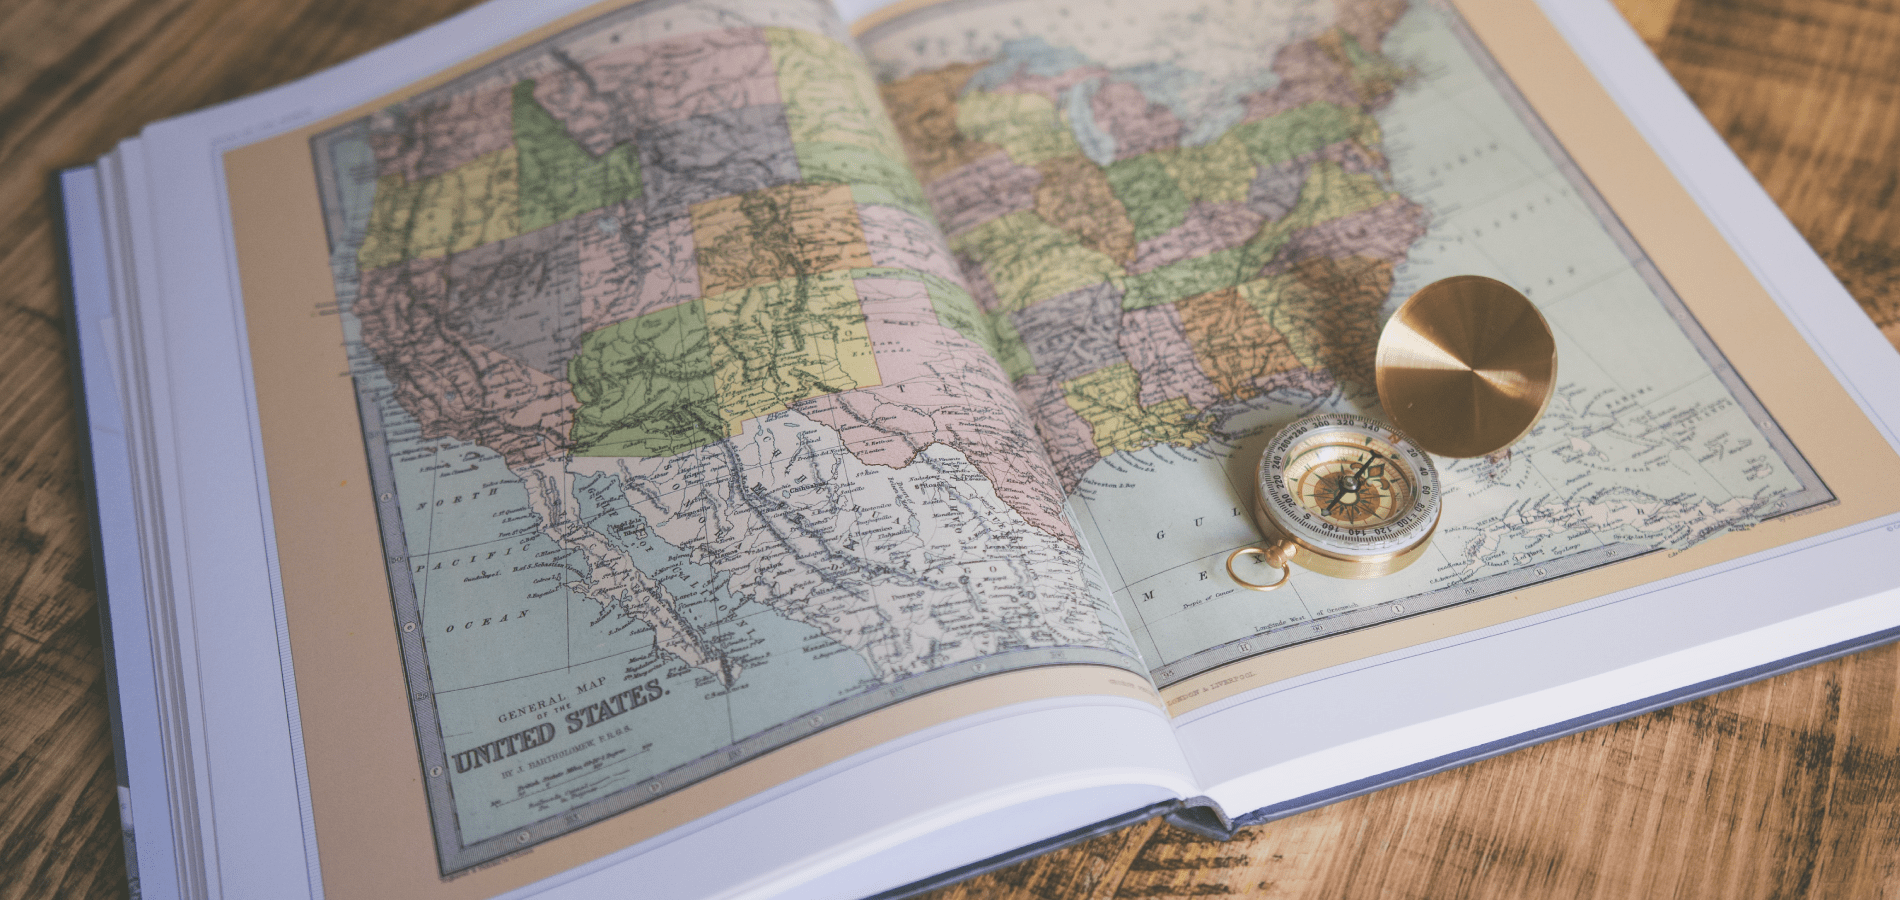 Book with map of the united states and a compass